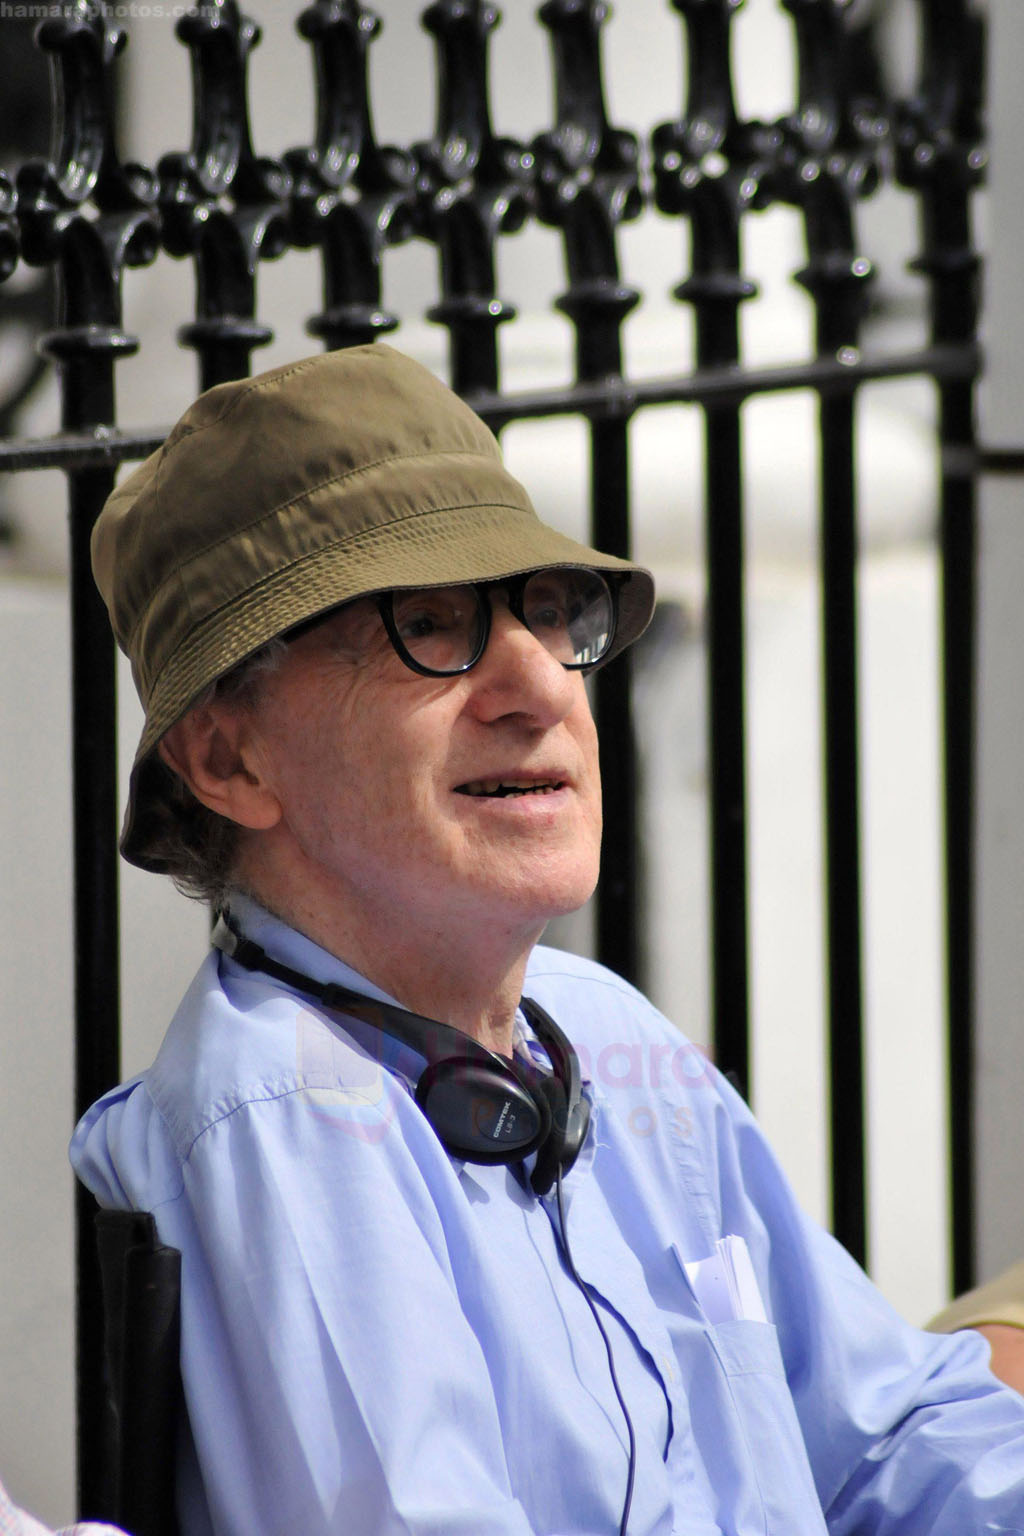 Woody Allen on the set of the _Untitled Woody Allen London Project_ in London, England - 24th August 2009 - IANS-WENN